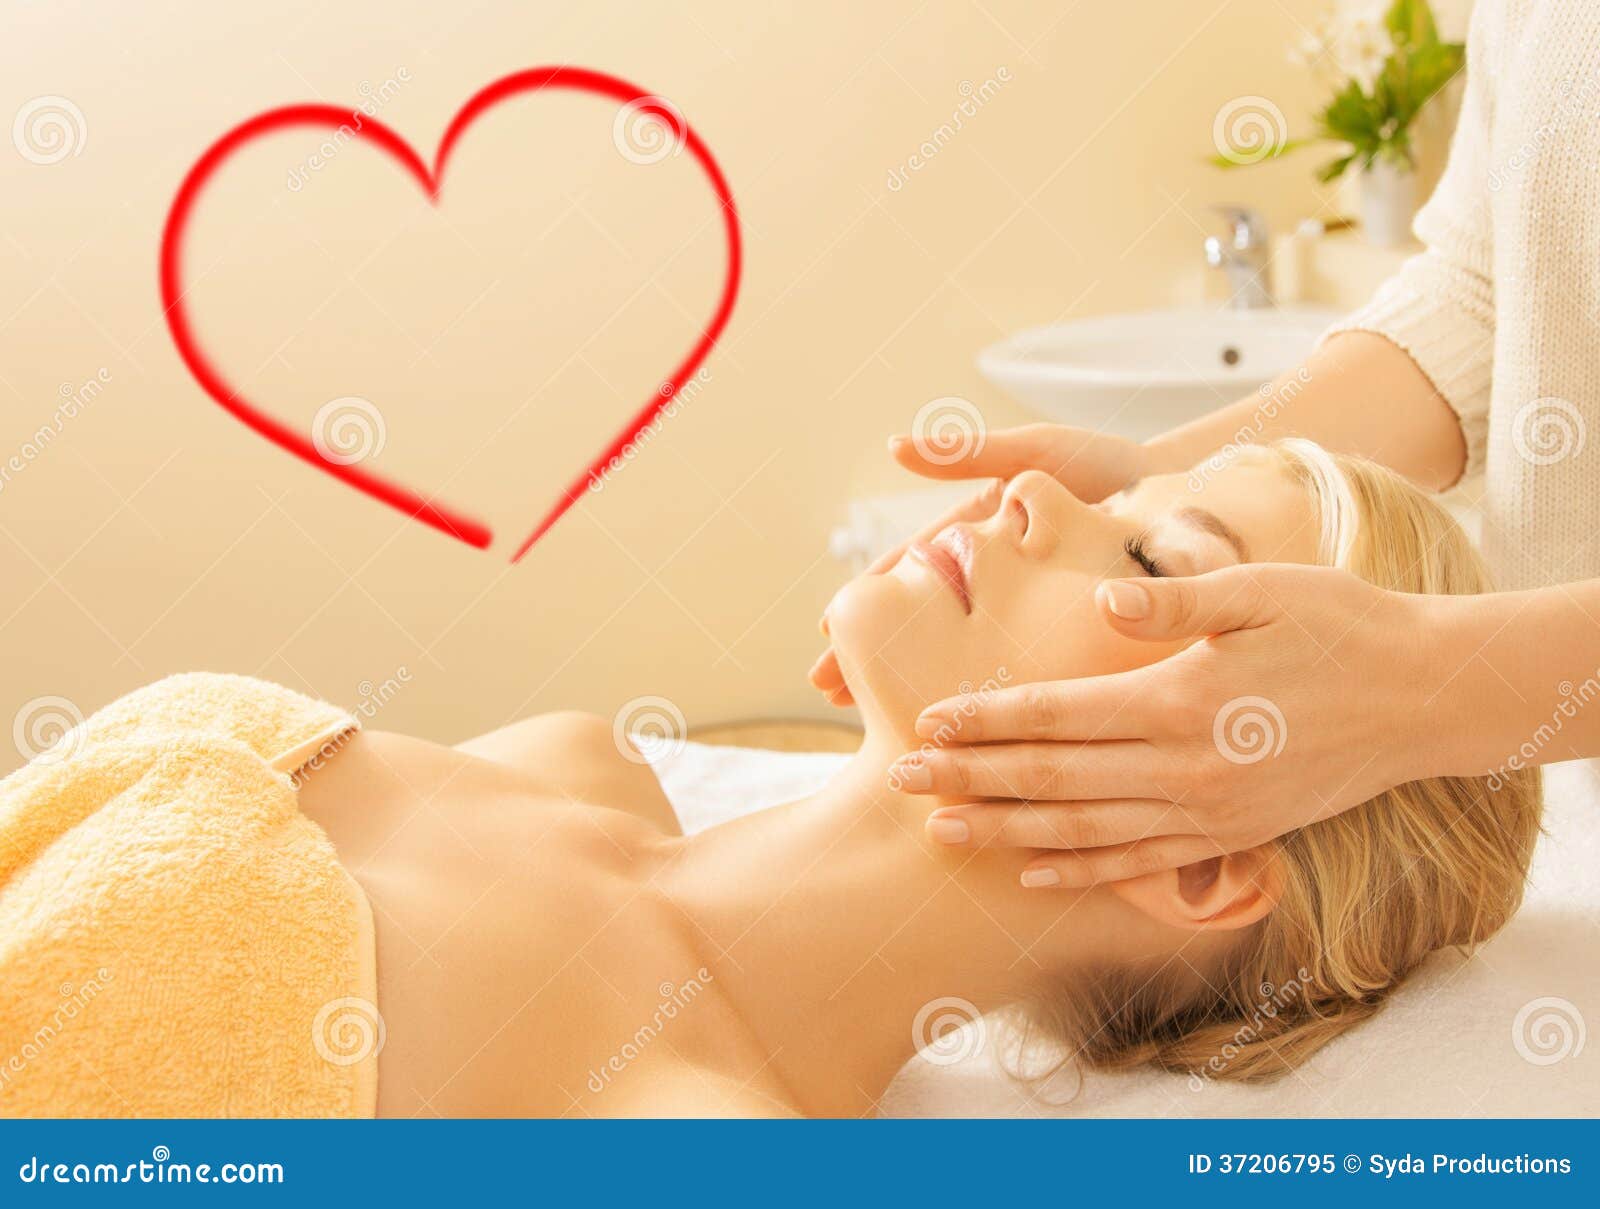 Woman In Spa Salon Getting Facial Stock Image Image Of Client